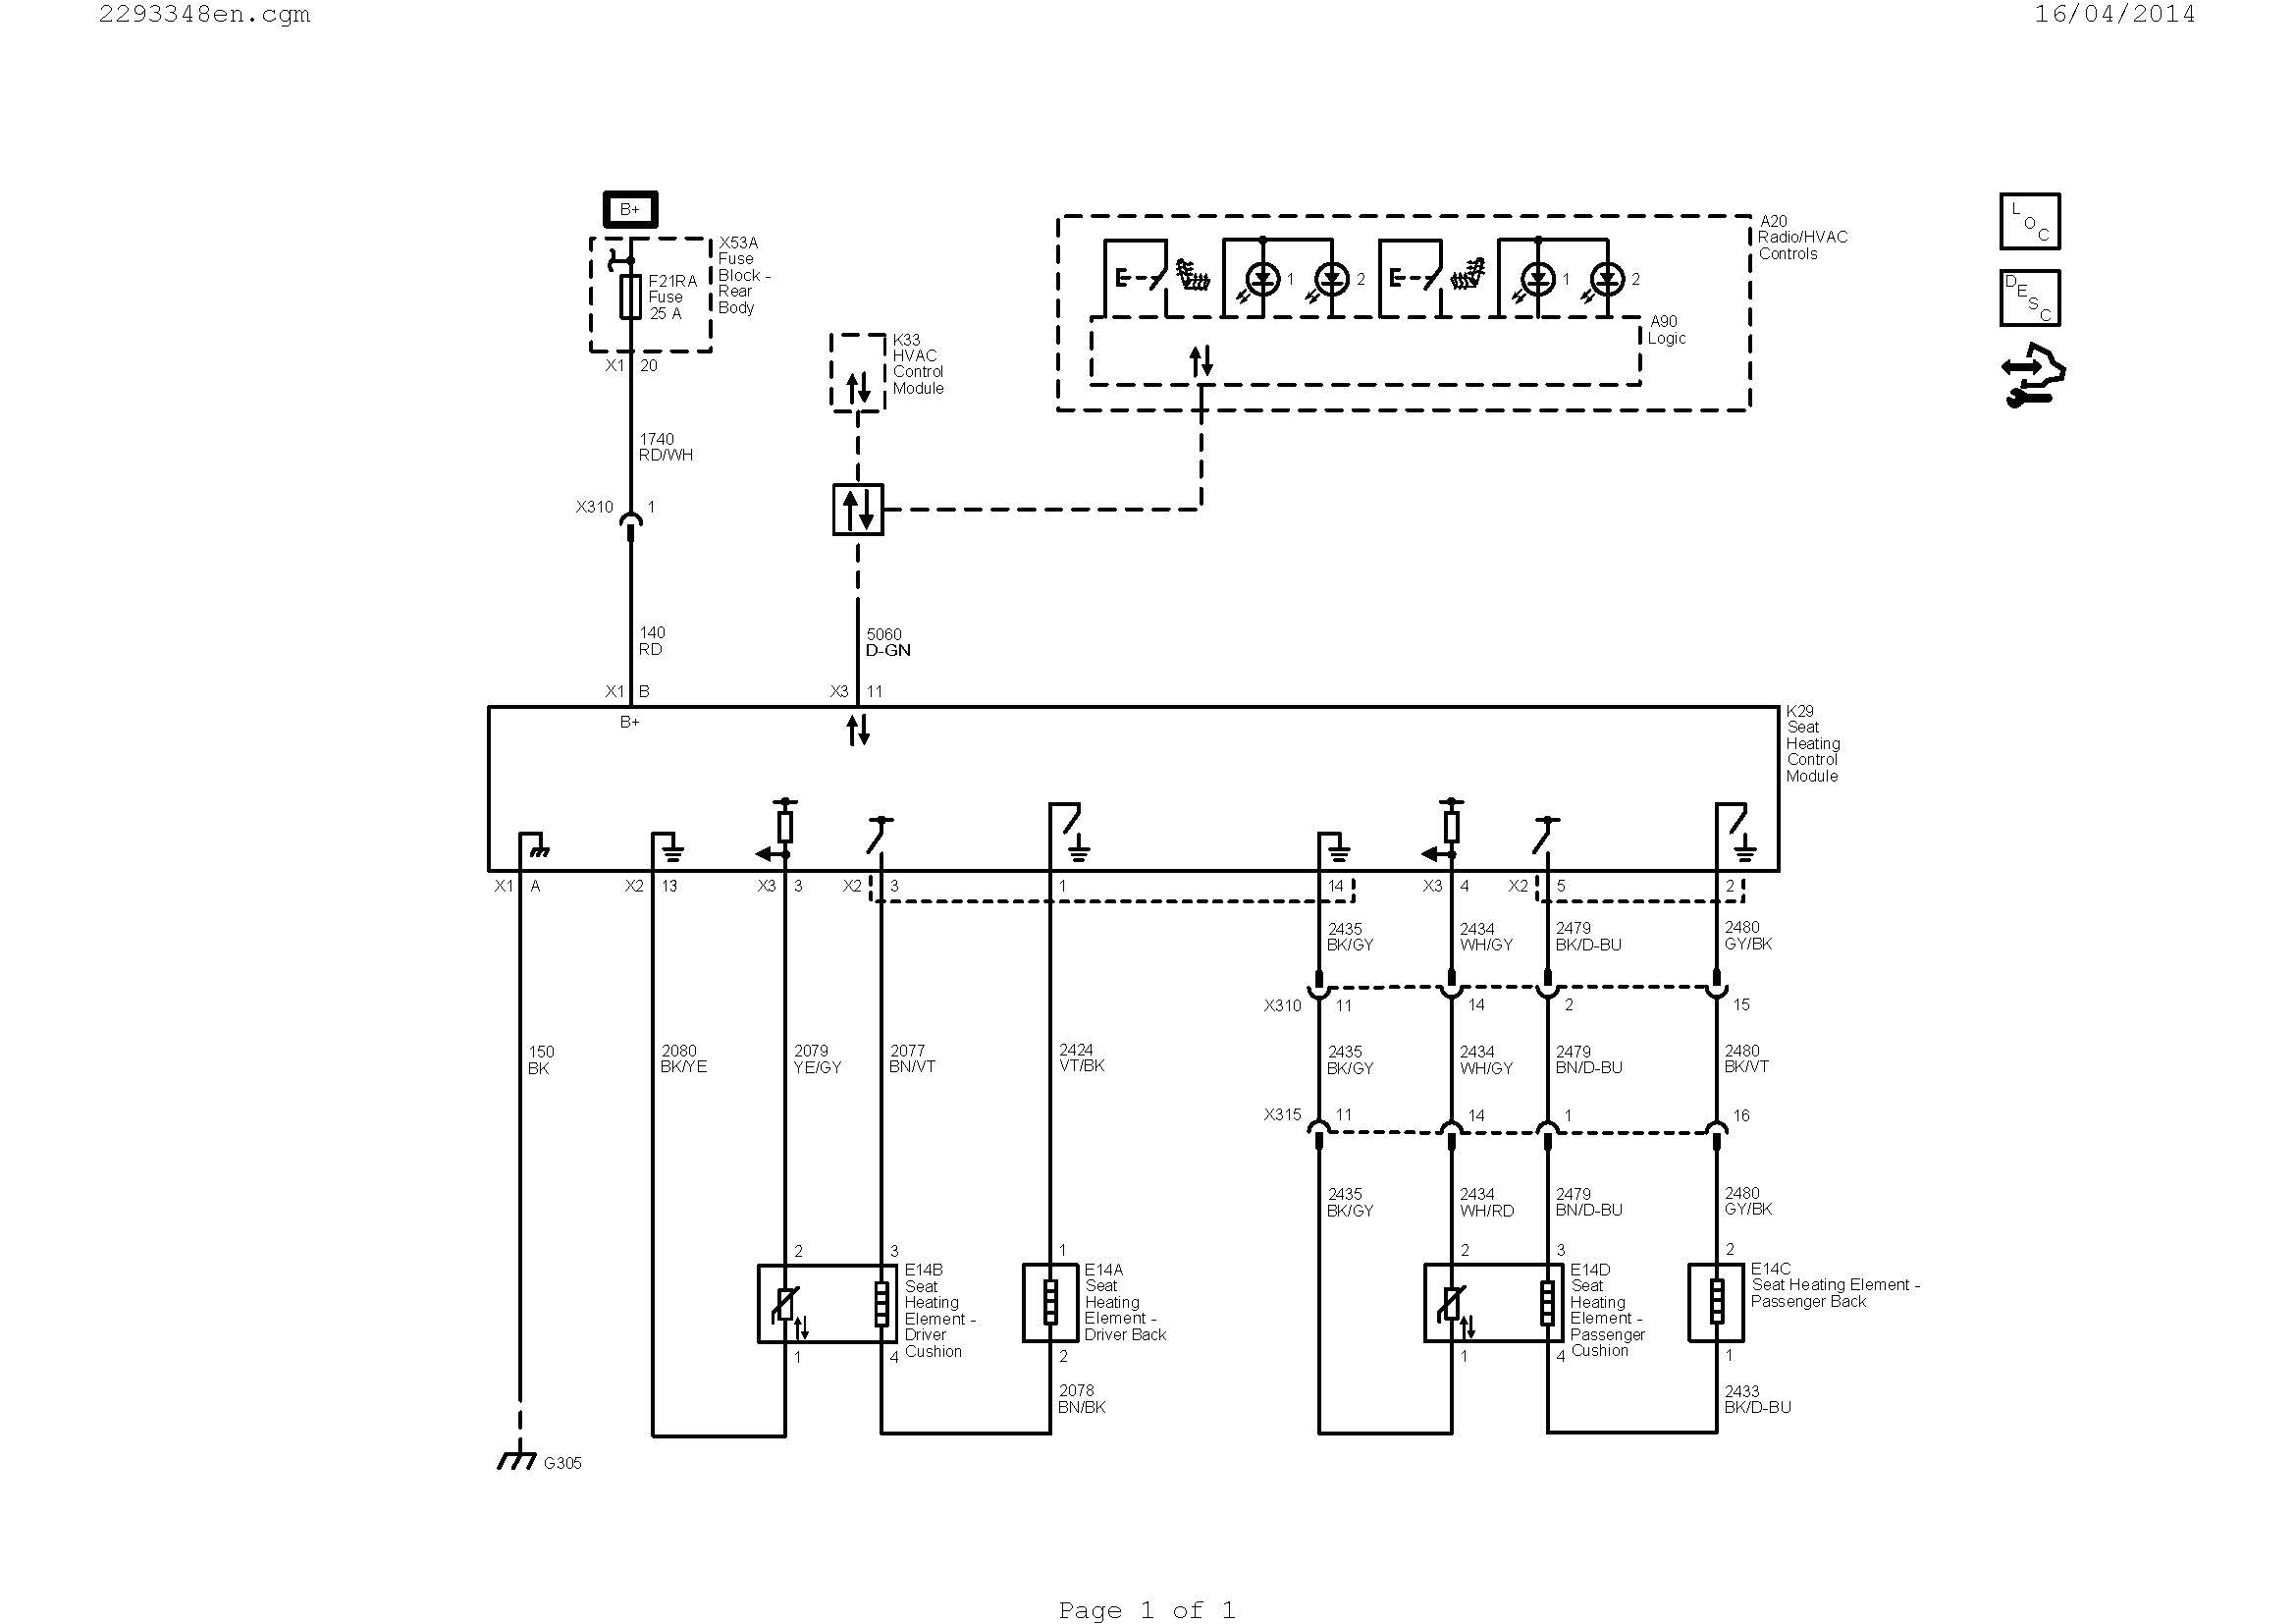 wiring diagram for thermostat to furnace nest wireless thermostat wiring diagram refrence wiring diagram ac